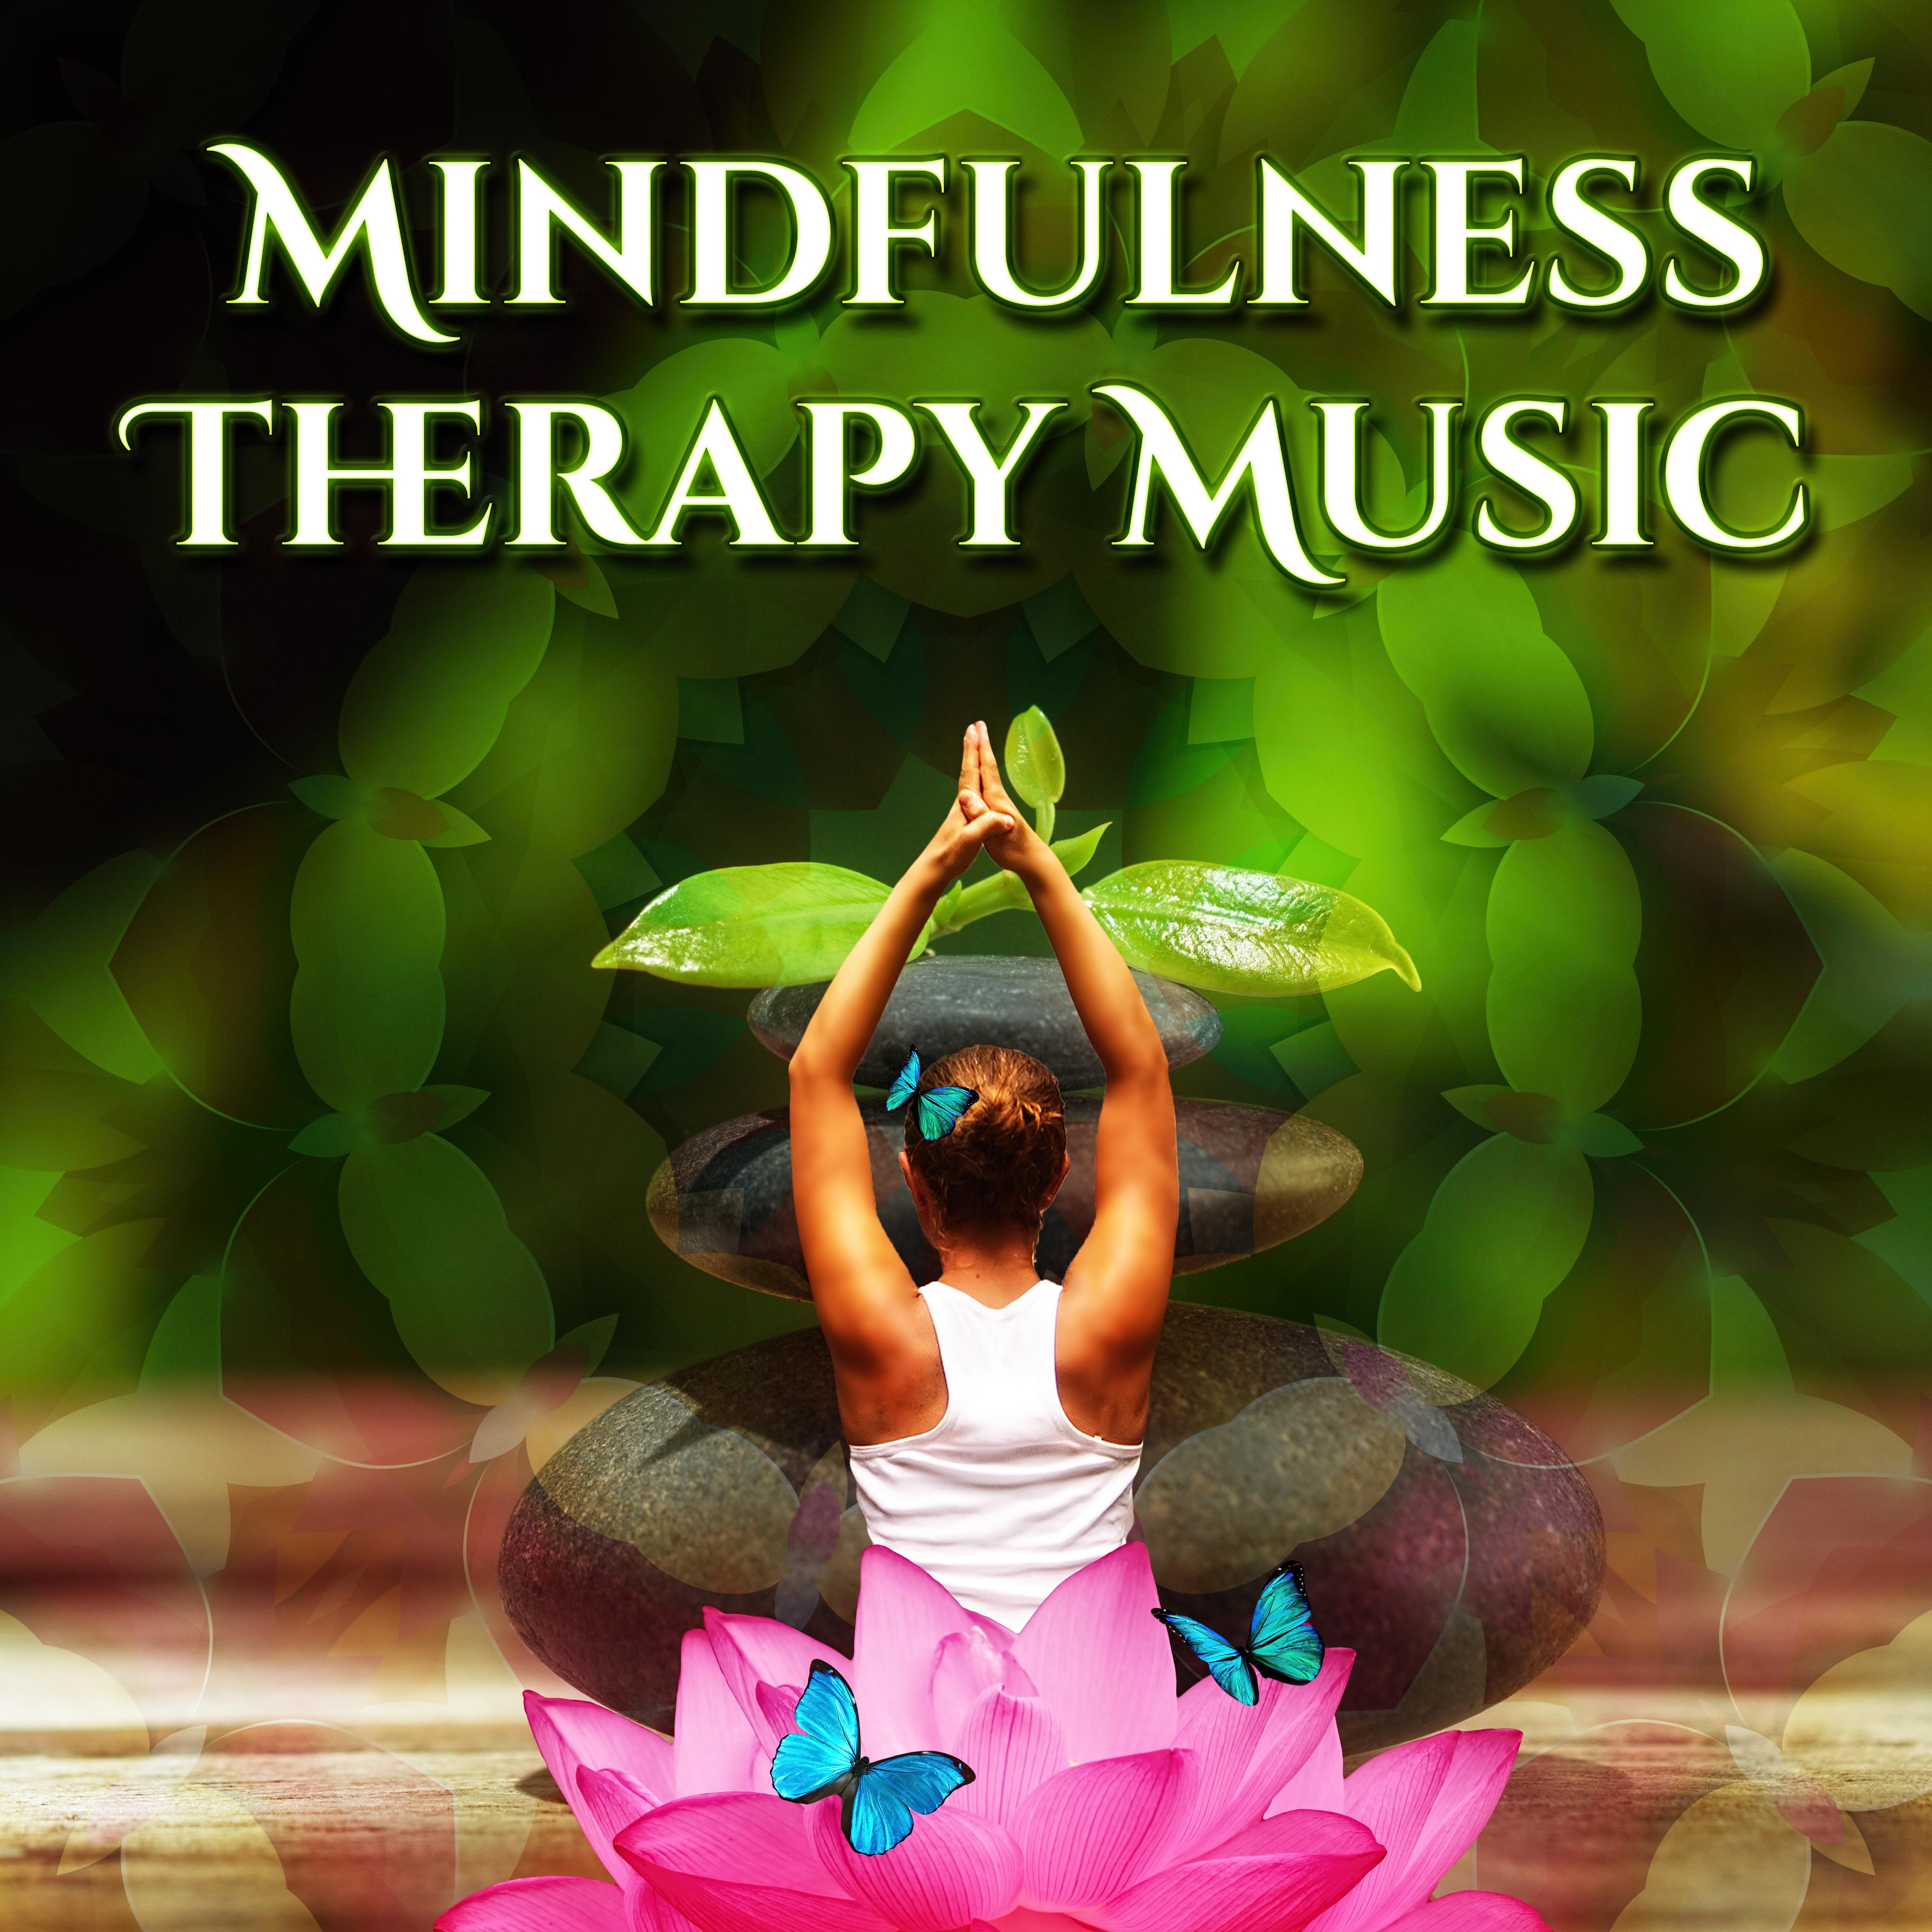 Mindfulness Therapy Music -  Calming Nature Sounds, Helpful for Meditation, Calm Down, Keep Focus, Be Mindfull